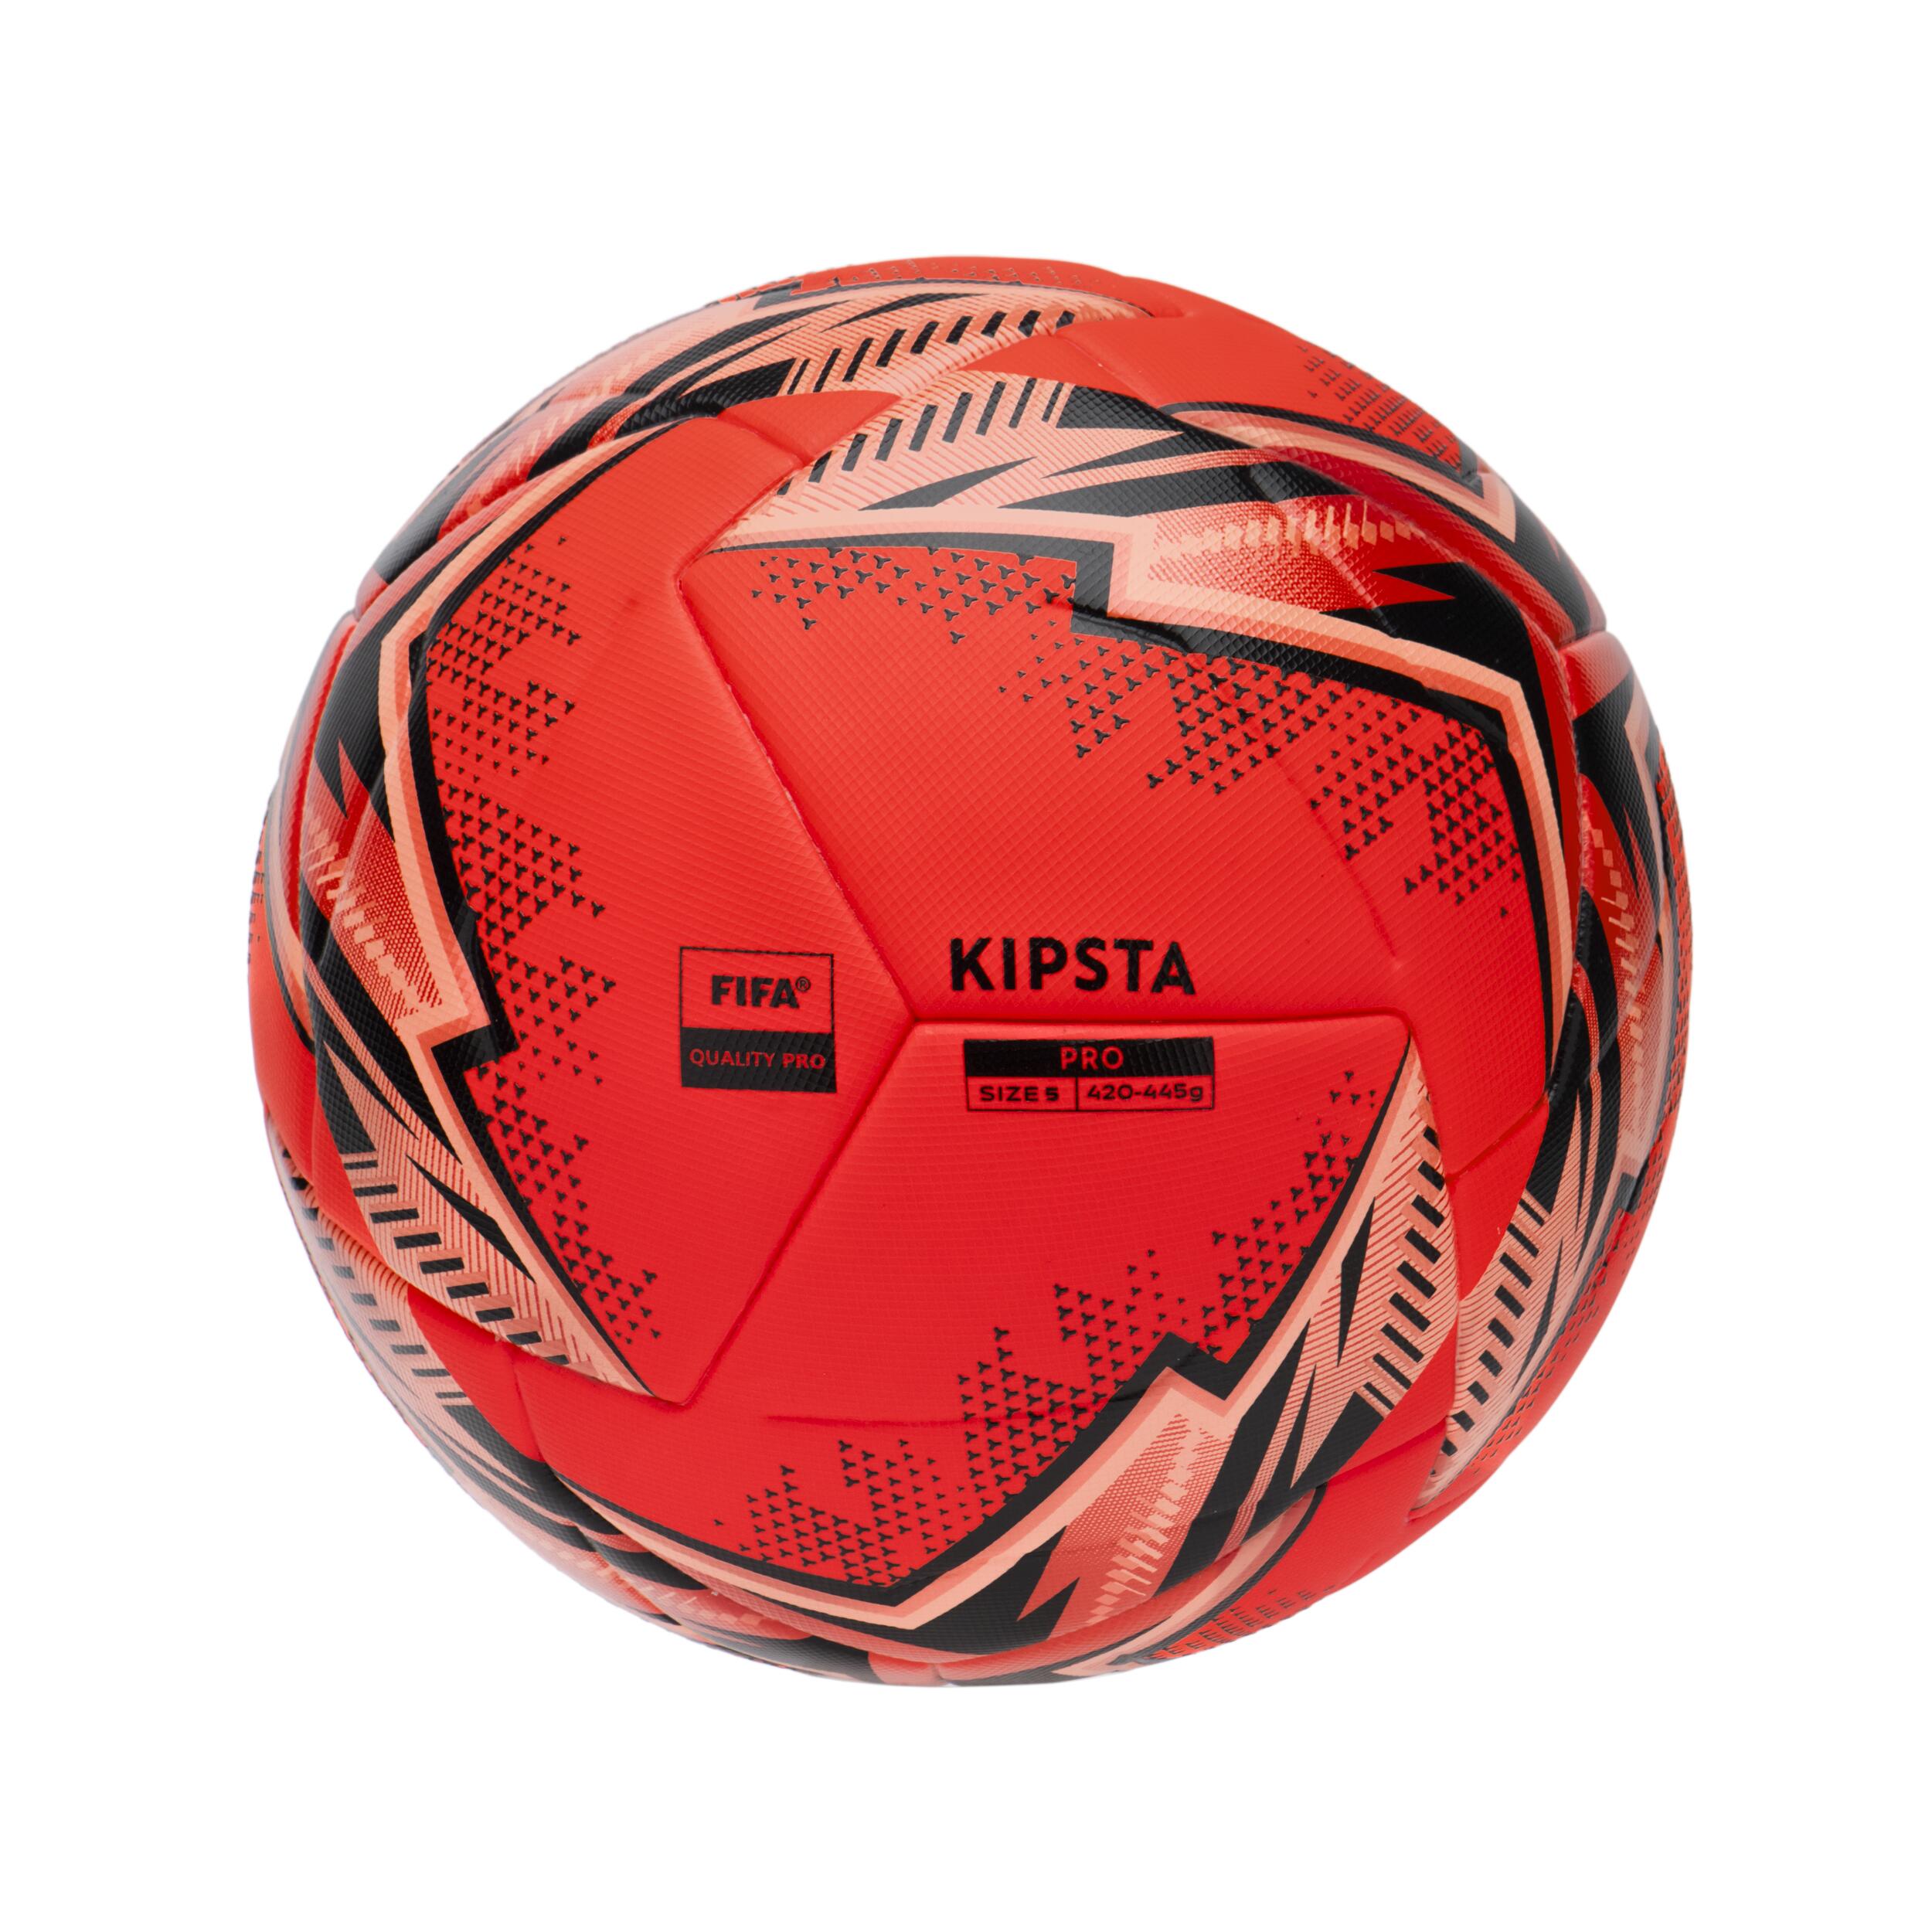 Thermobonded Size 5 FIFA Quality Pro Football Pro Ball - Red 8/8